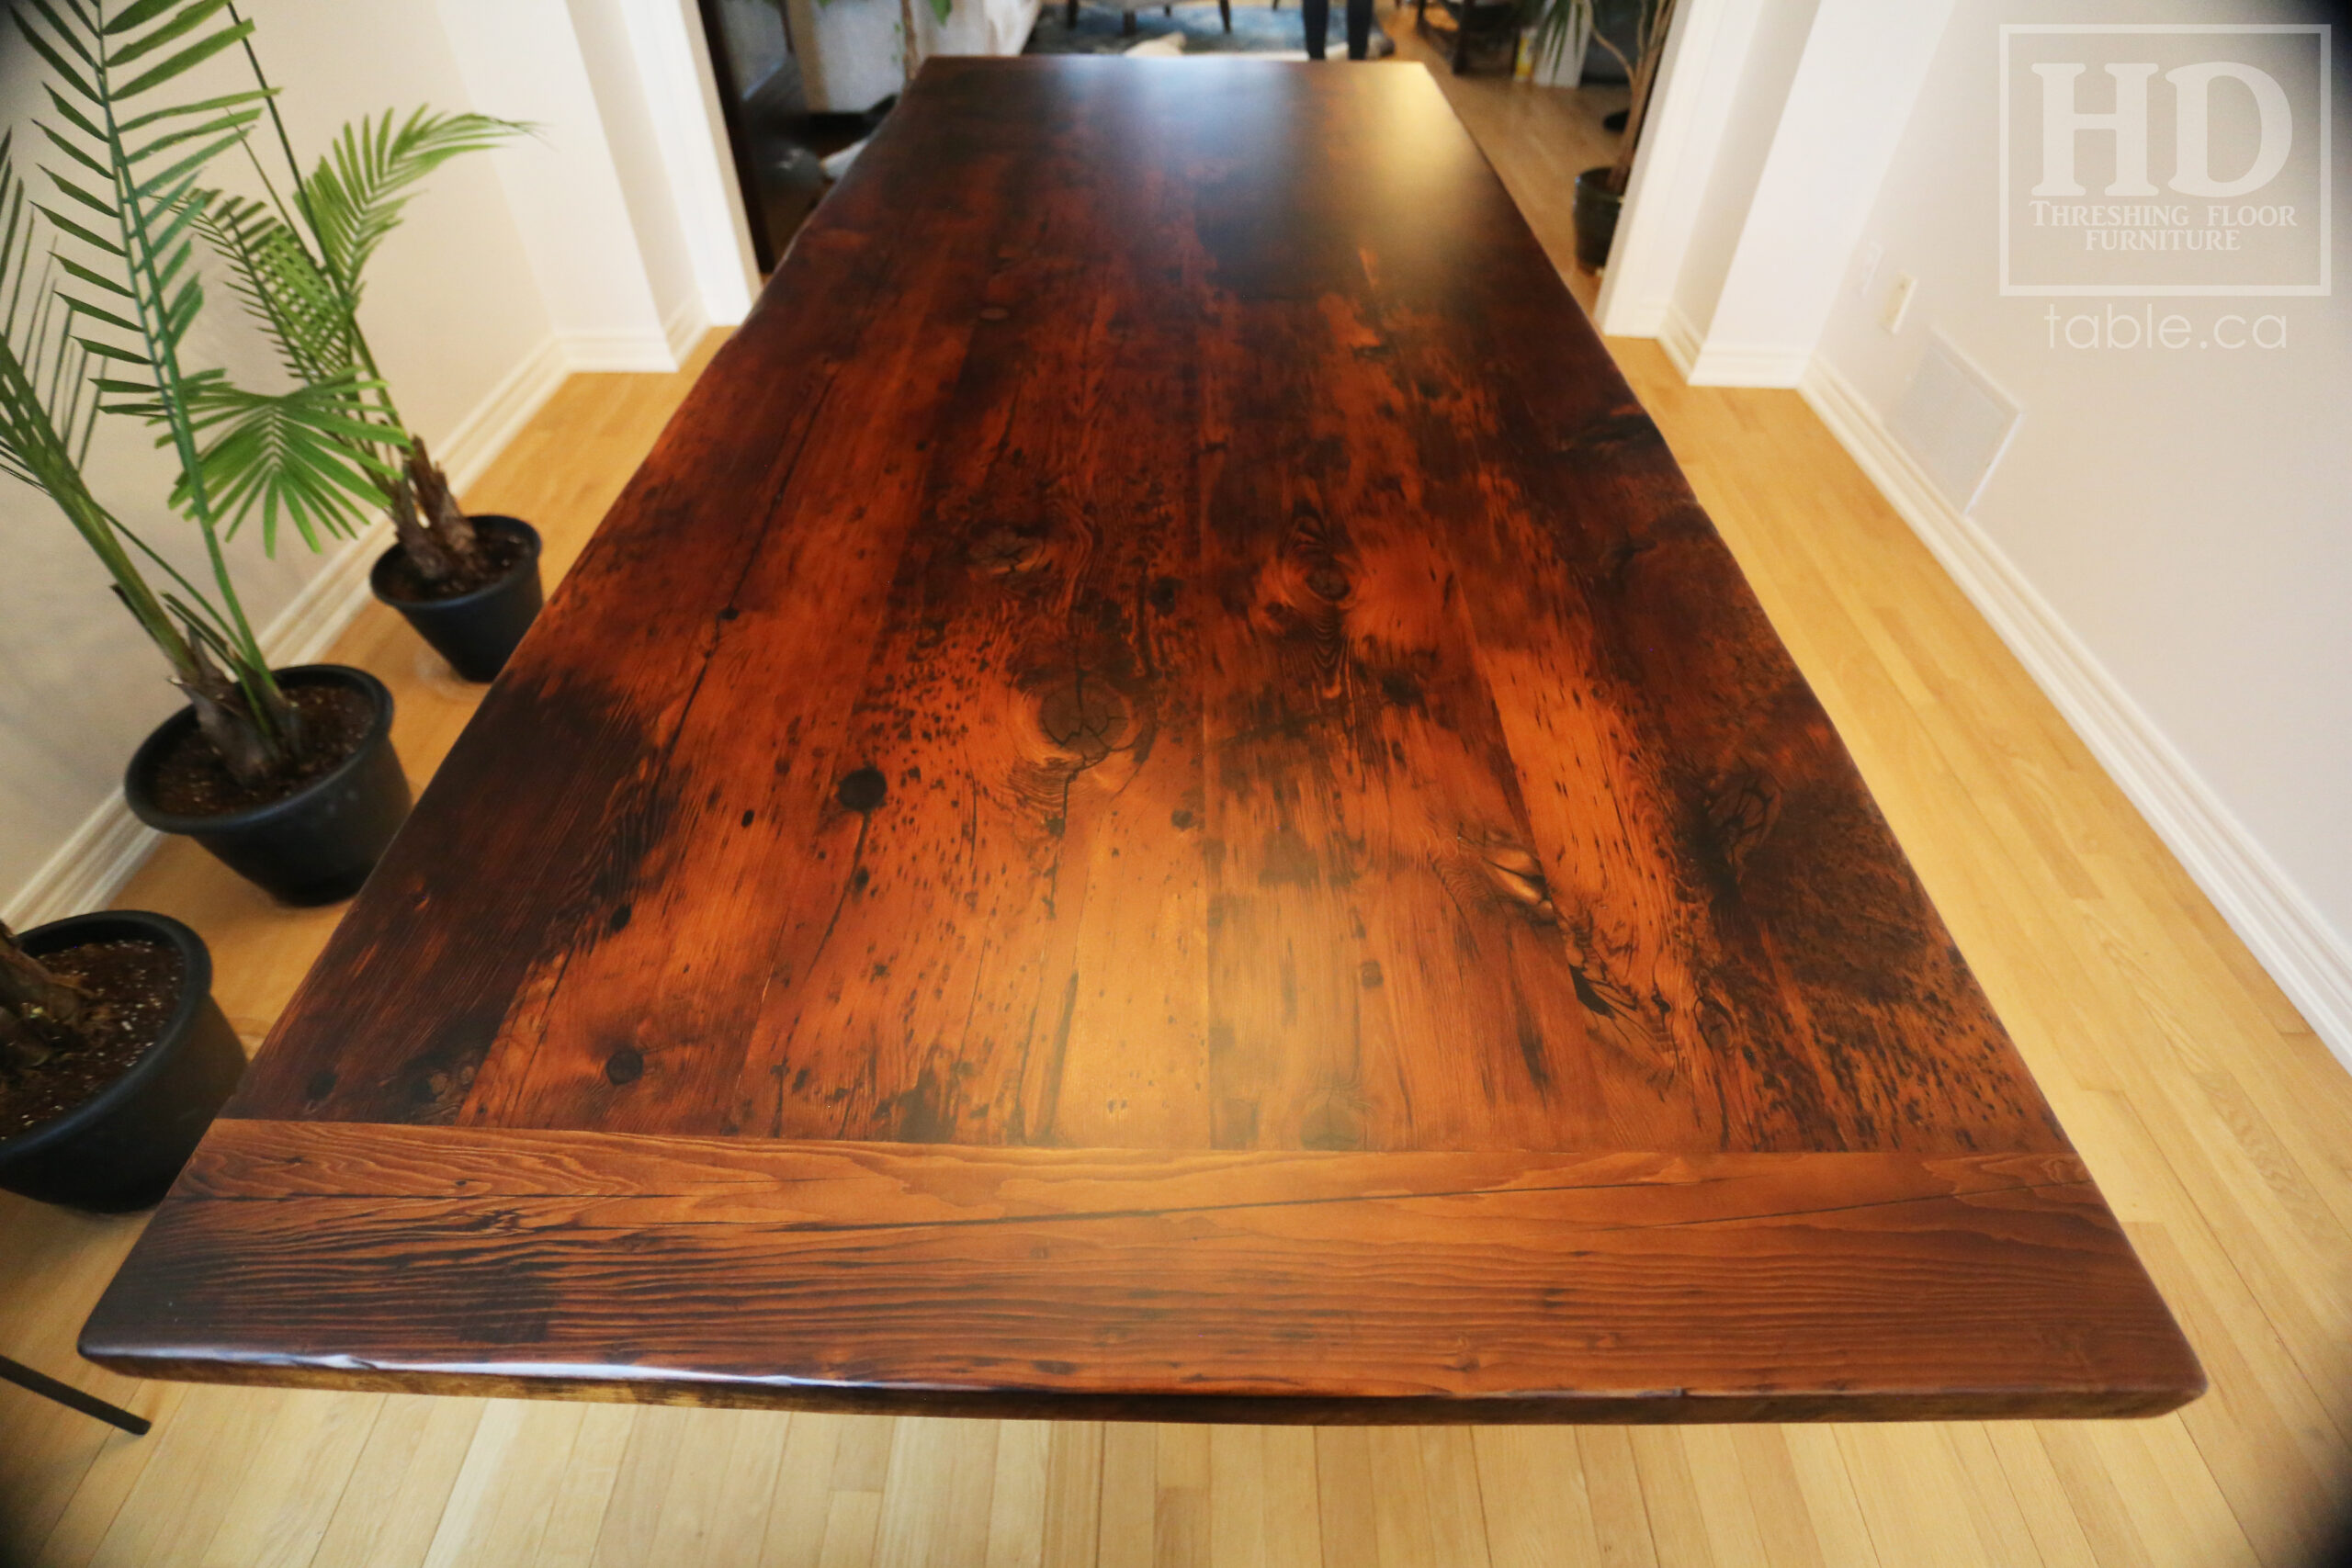 8.5' Ontario Barnwood Boardroom Table we made for a Barrie Company - 42" wide - Sawbuck Base - Old Growth Hemlock Threshing Floor Construction - Original edges & distressing maintained - Premium epoxy + matte polyurethane finish  - www.table.ca